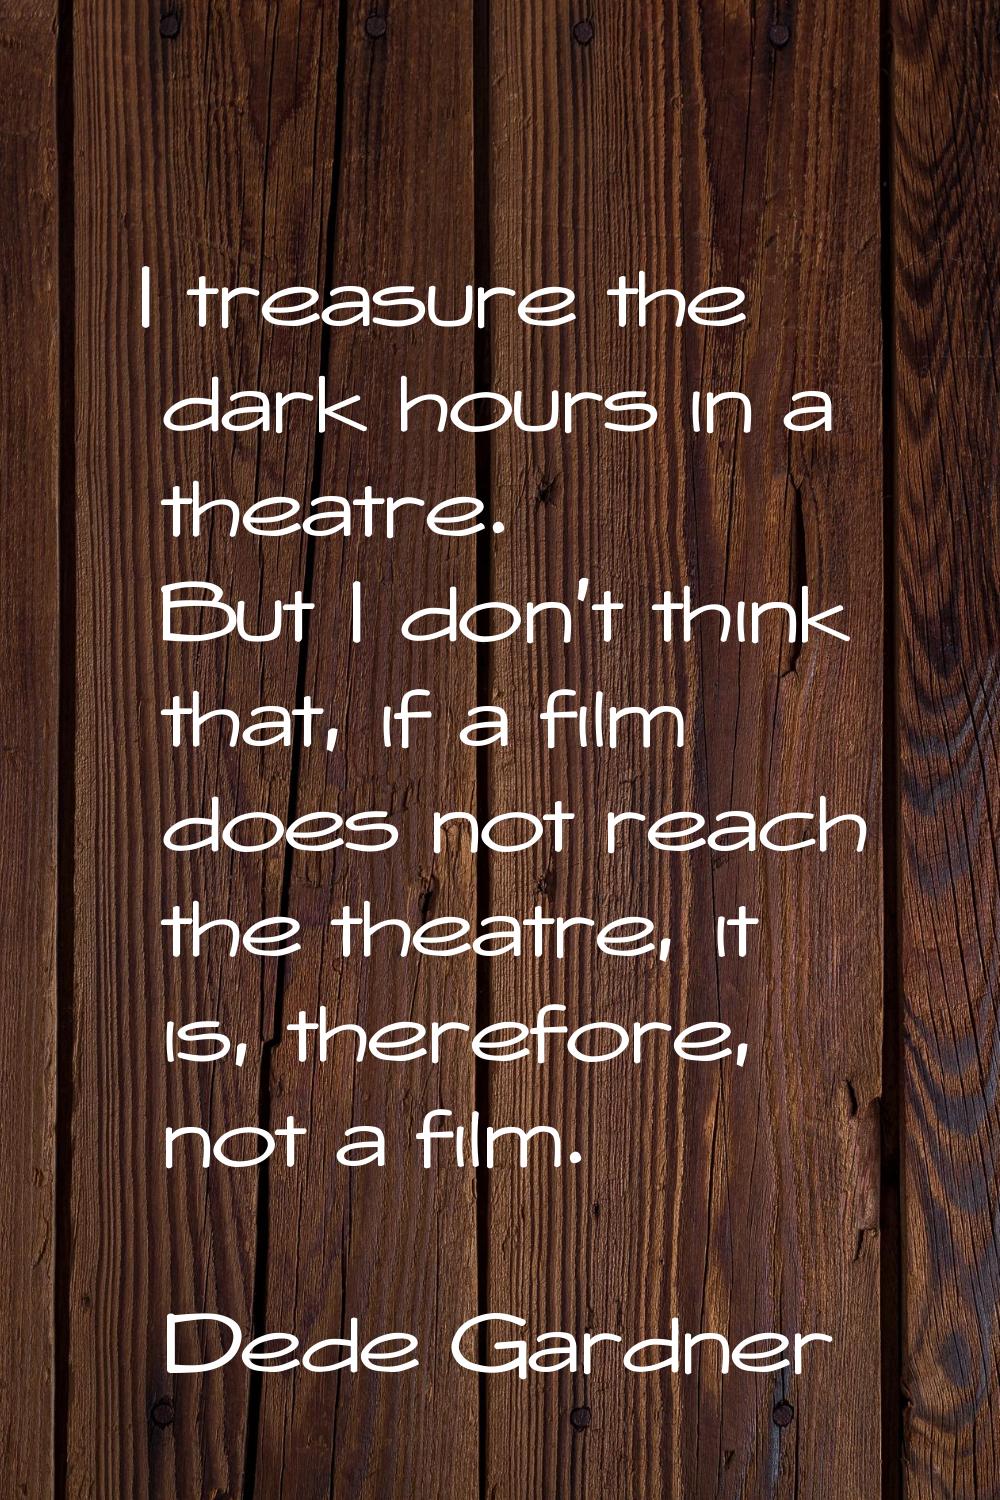 I treasure the dark hours in a theatre. But I don't think that, if a film does not reach the theatr